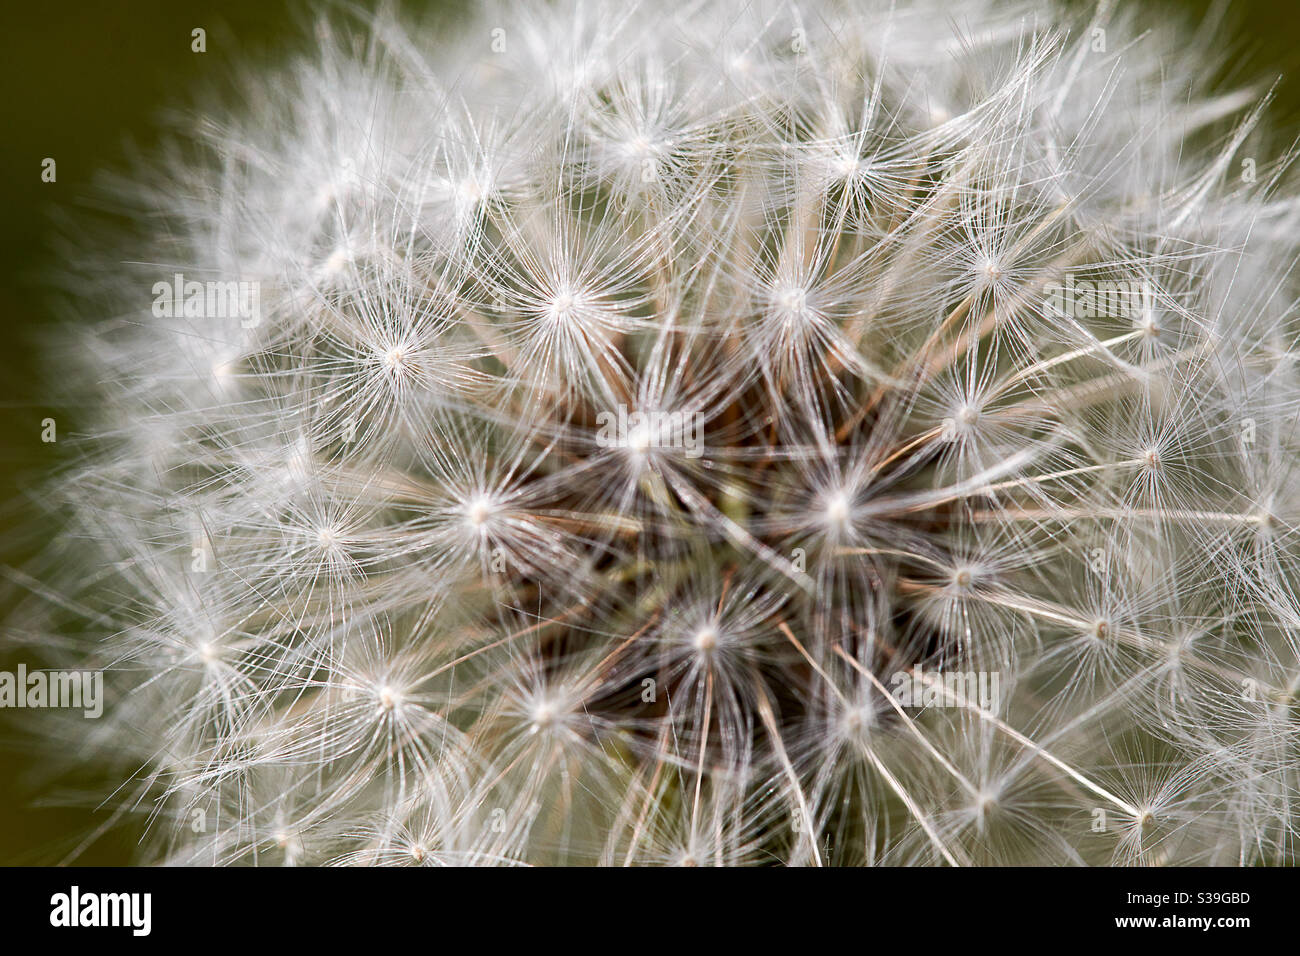 Dandelion from above. the flower is ripe and forms the typical round ball of fine white seeds reminiscent of parachutes. everything in front of a green blurred background Stock Photo